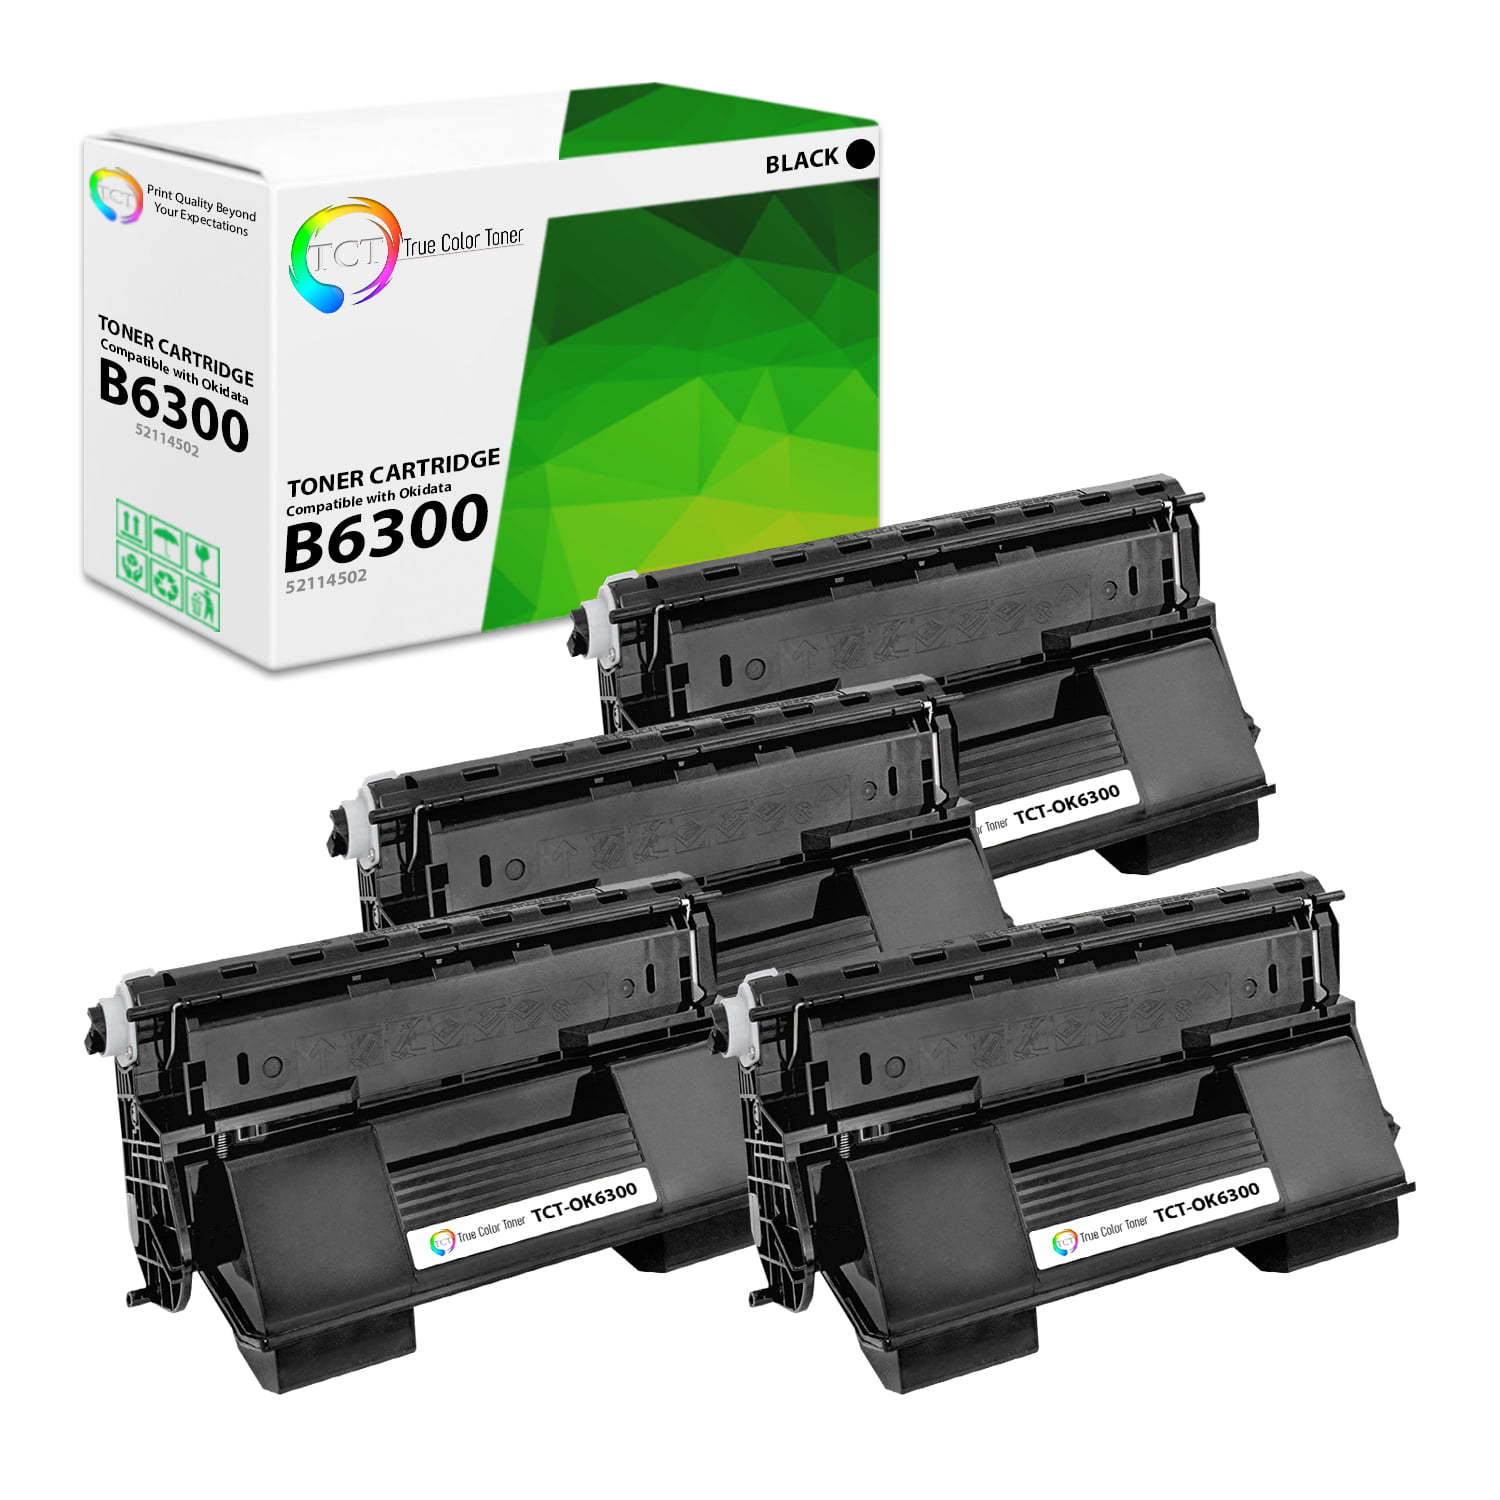 Compatible Toner Cartridge Replacement for the B6300 Series - 2 Pack Black - Walmart.com